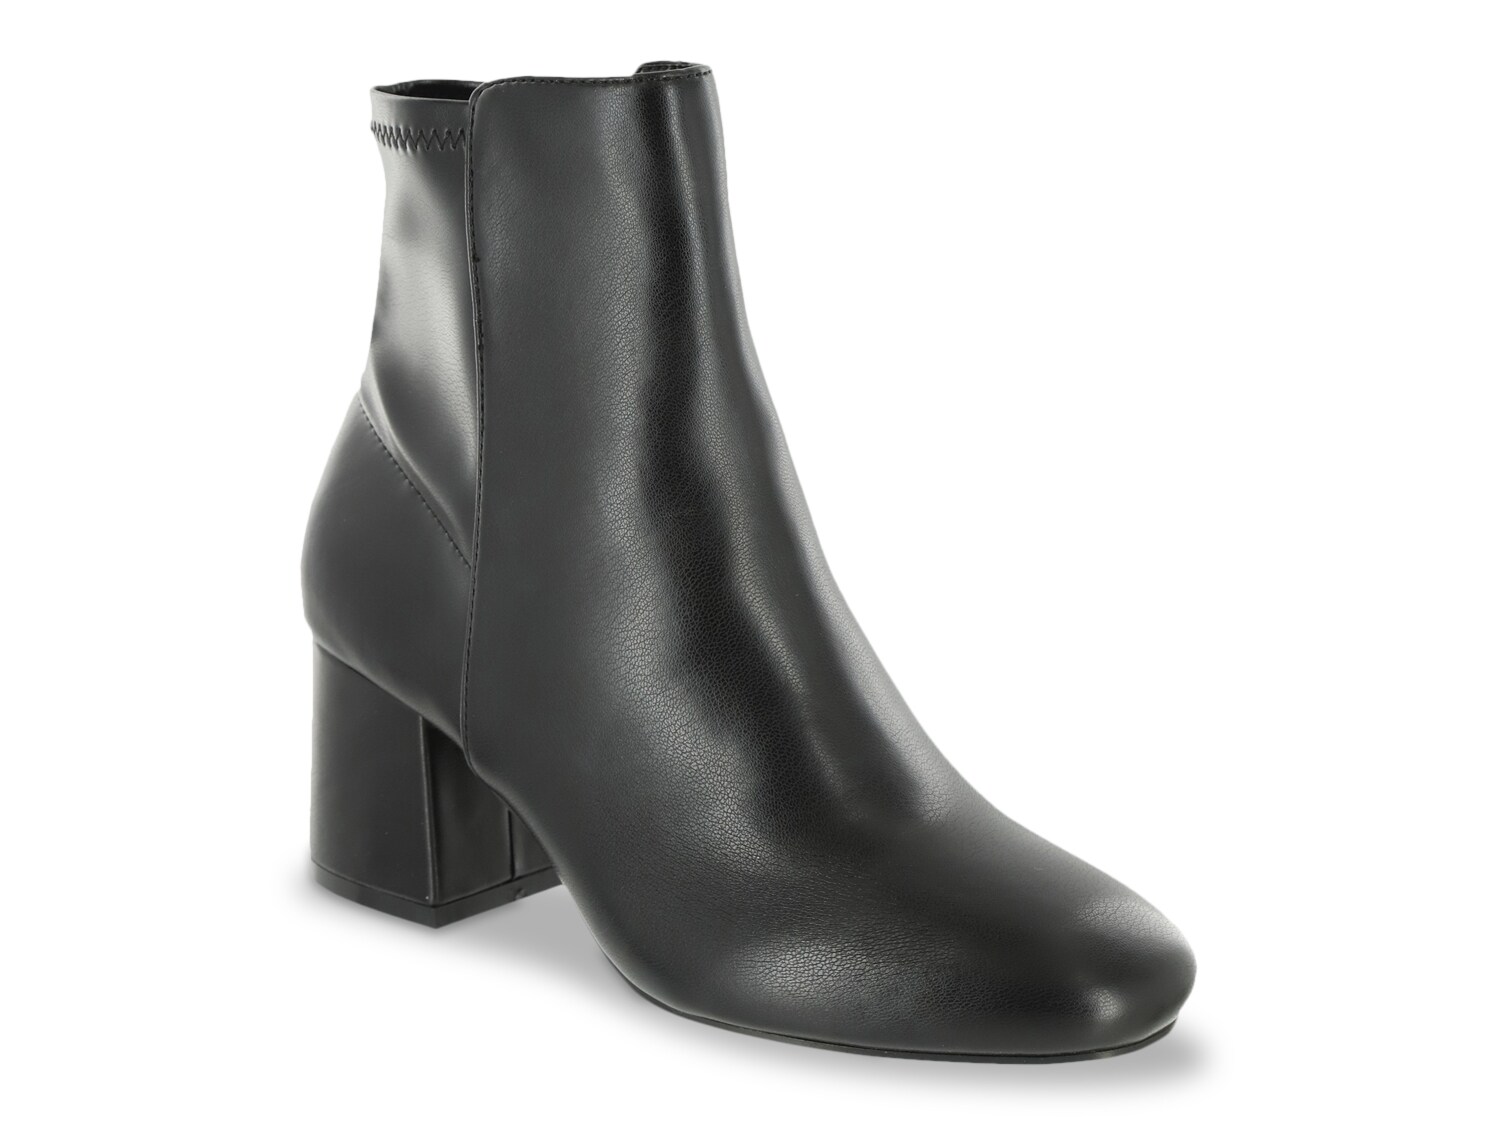 Mia Amore Anali Bootie - Free Shipping | DSW